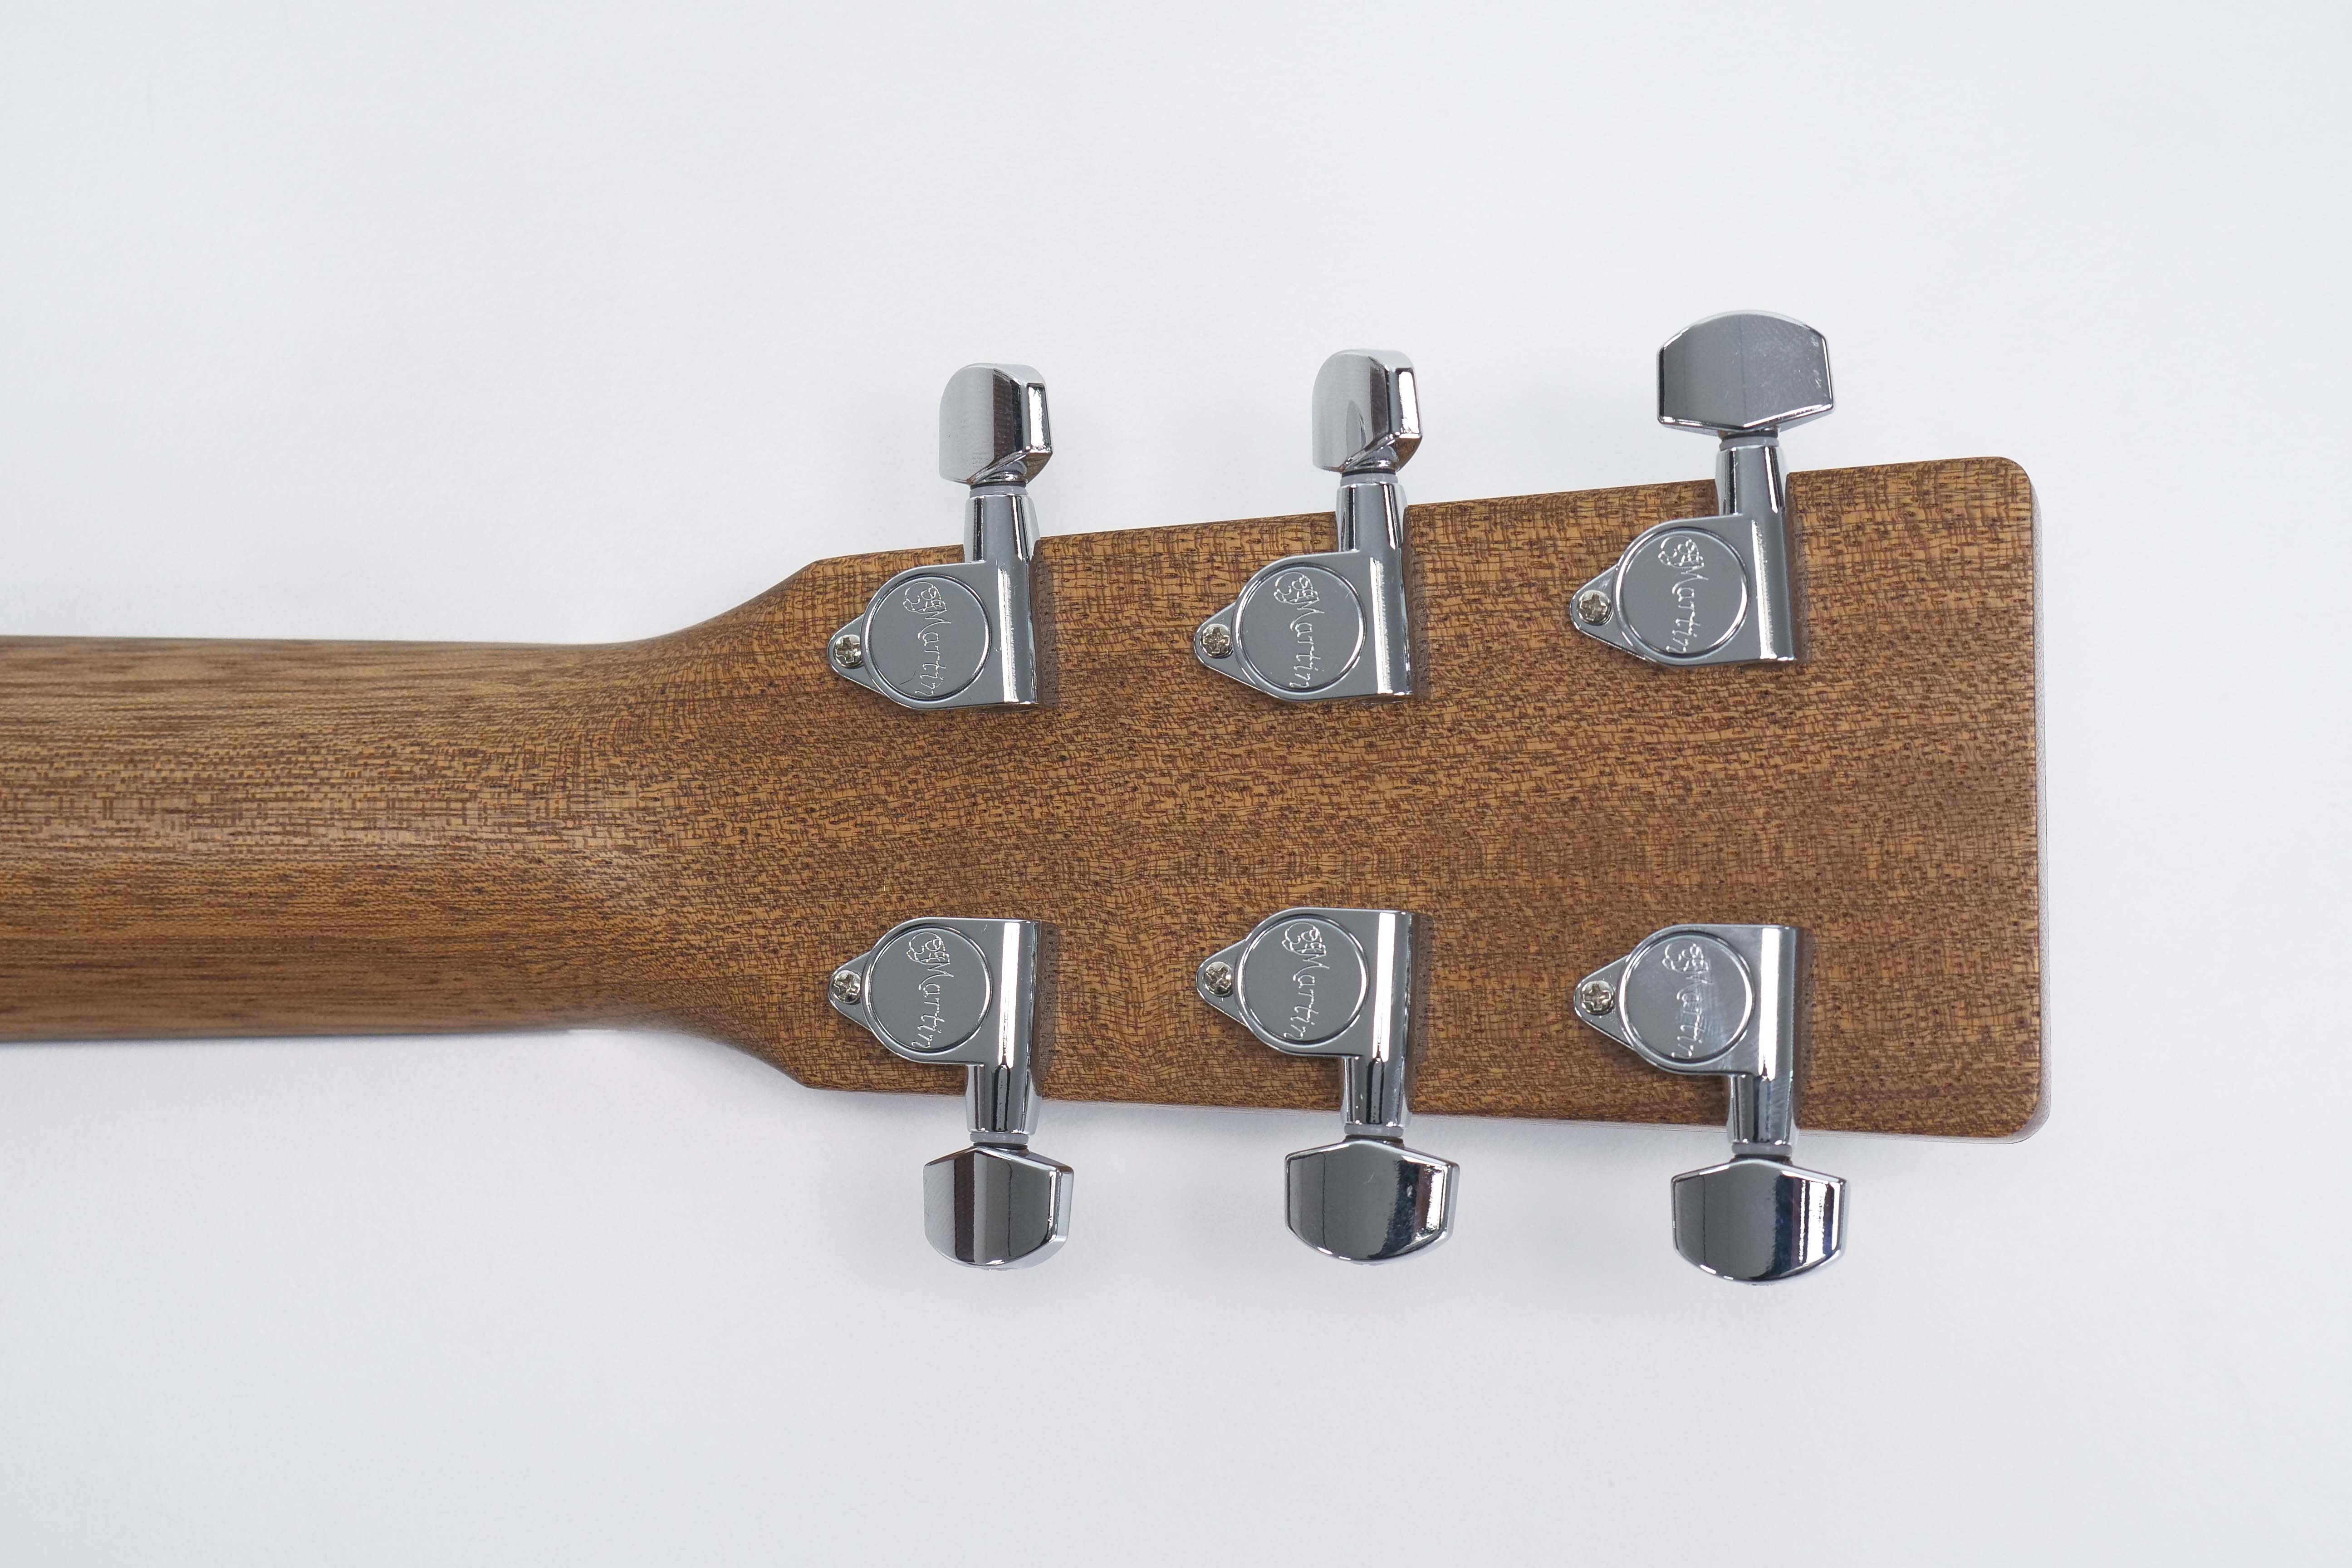 back of the headstock